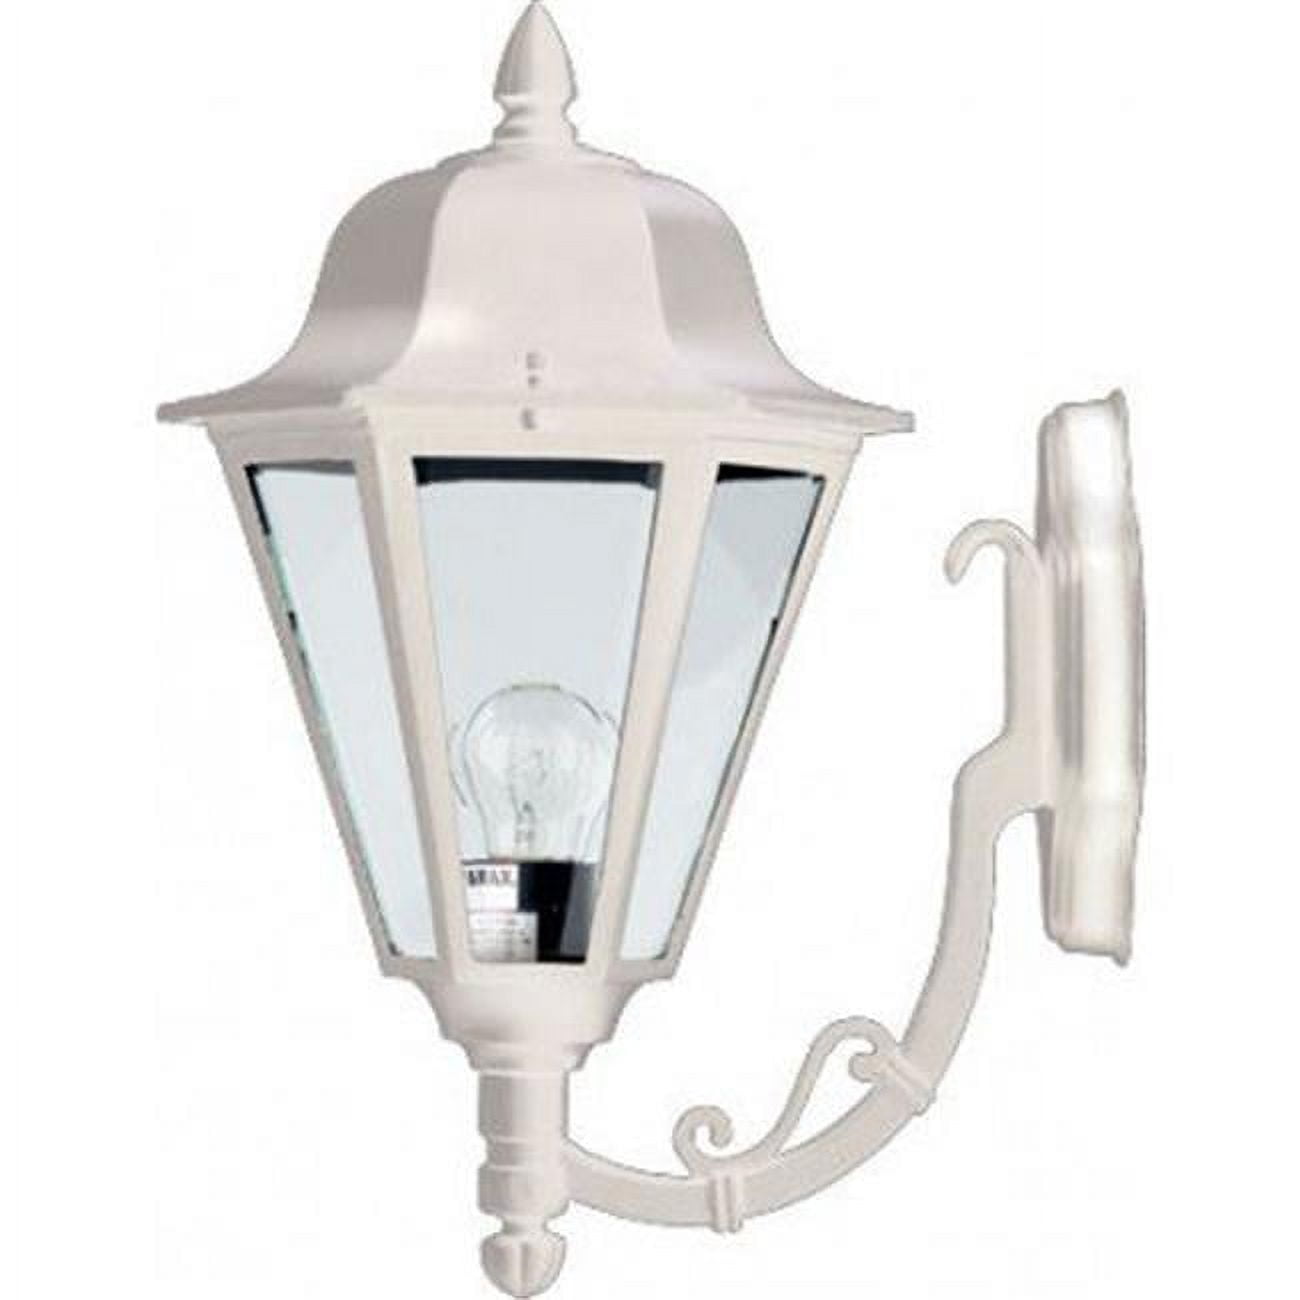 Picture of Dabmar Lighting GM134-W-FROST 13W & 120V S13-GU24 Daniella Wall Light Fixture with Frosted Glass - White